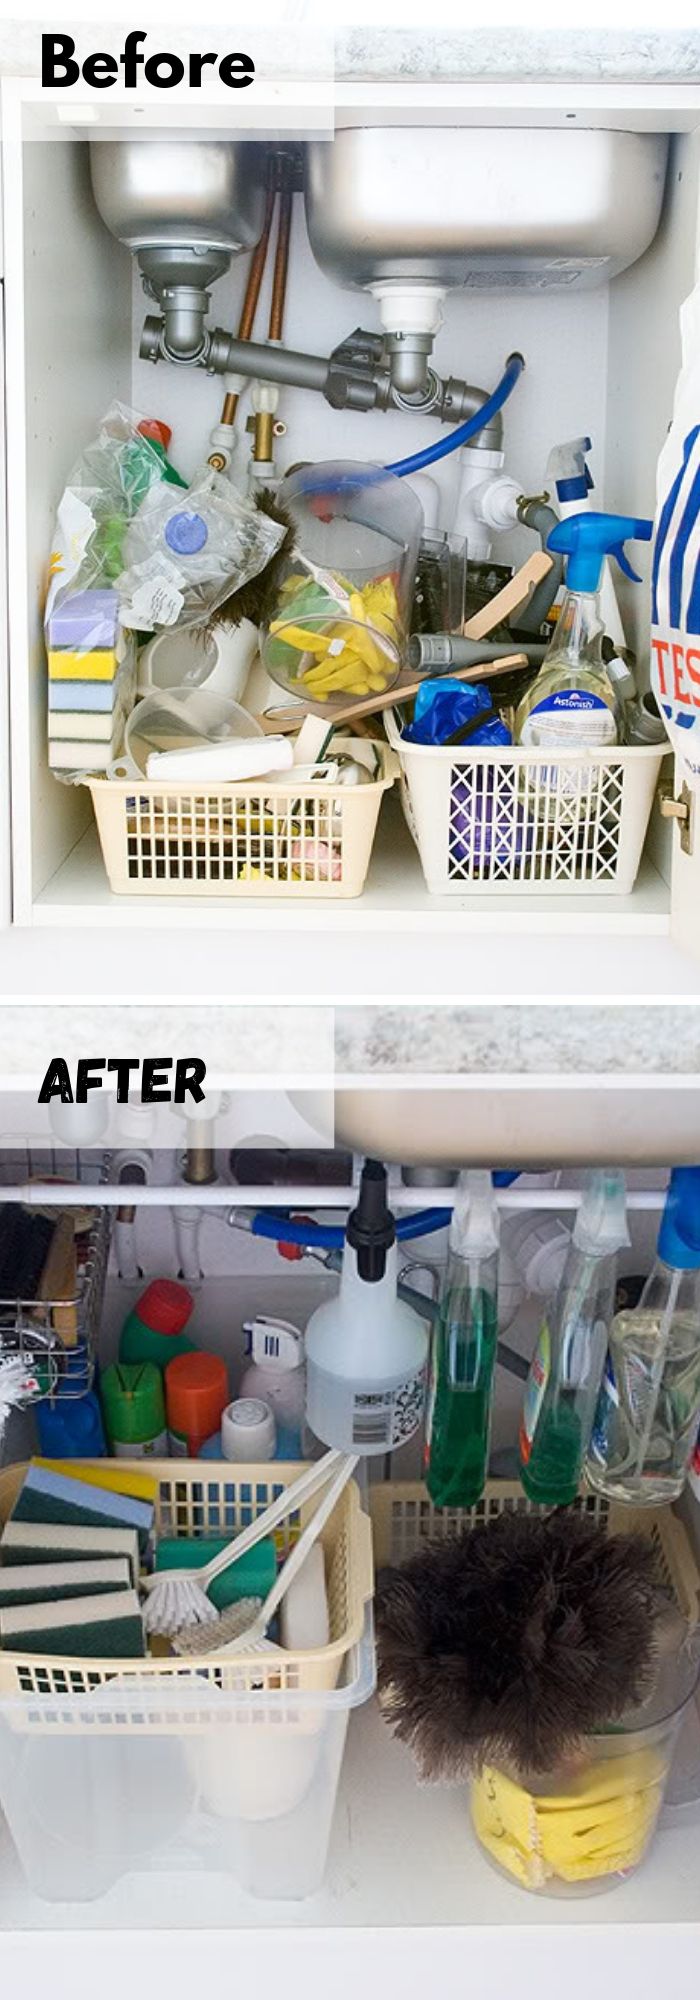 35 tips to organize home